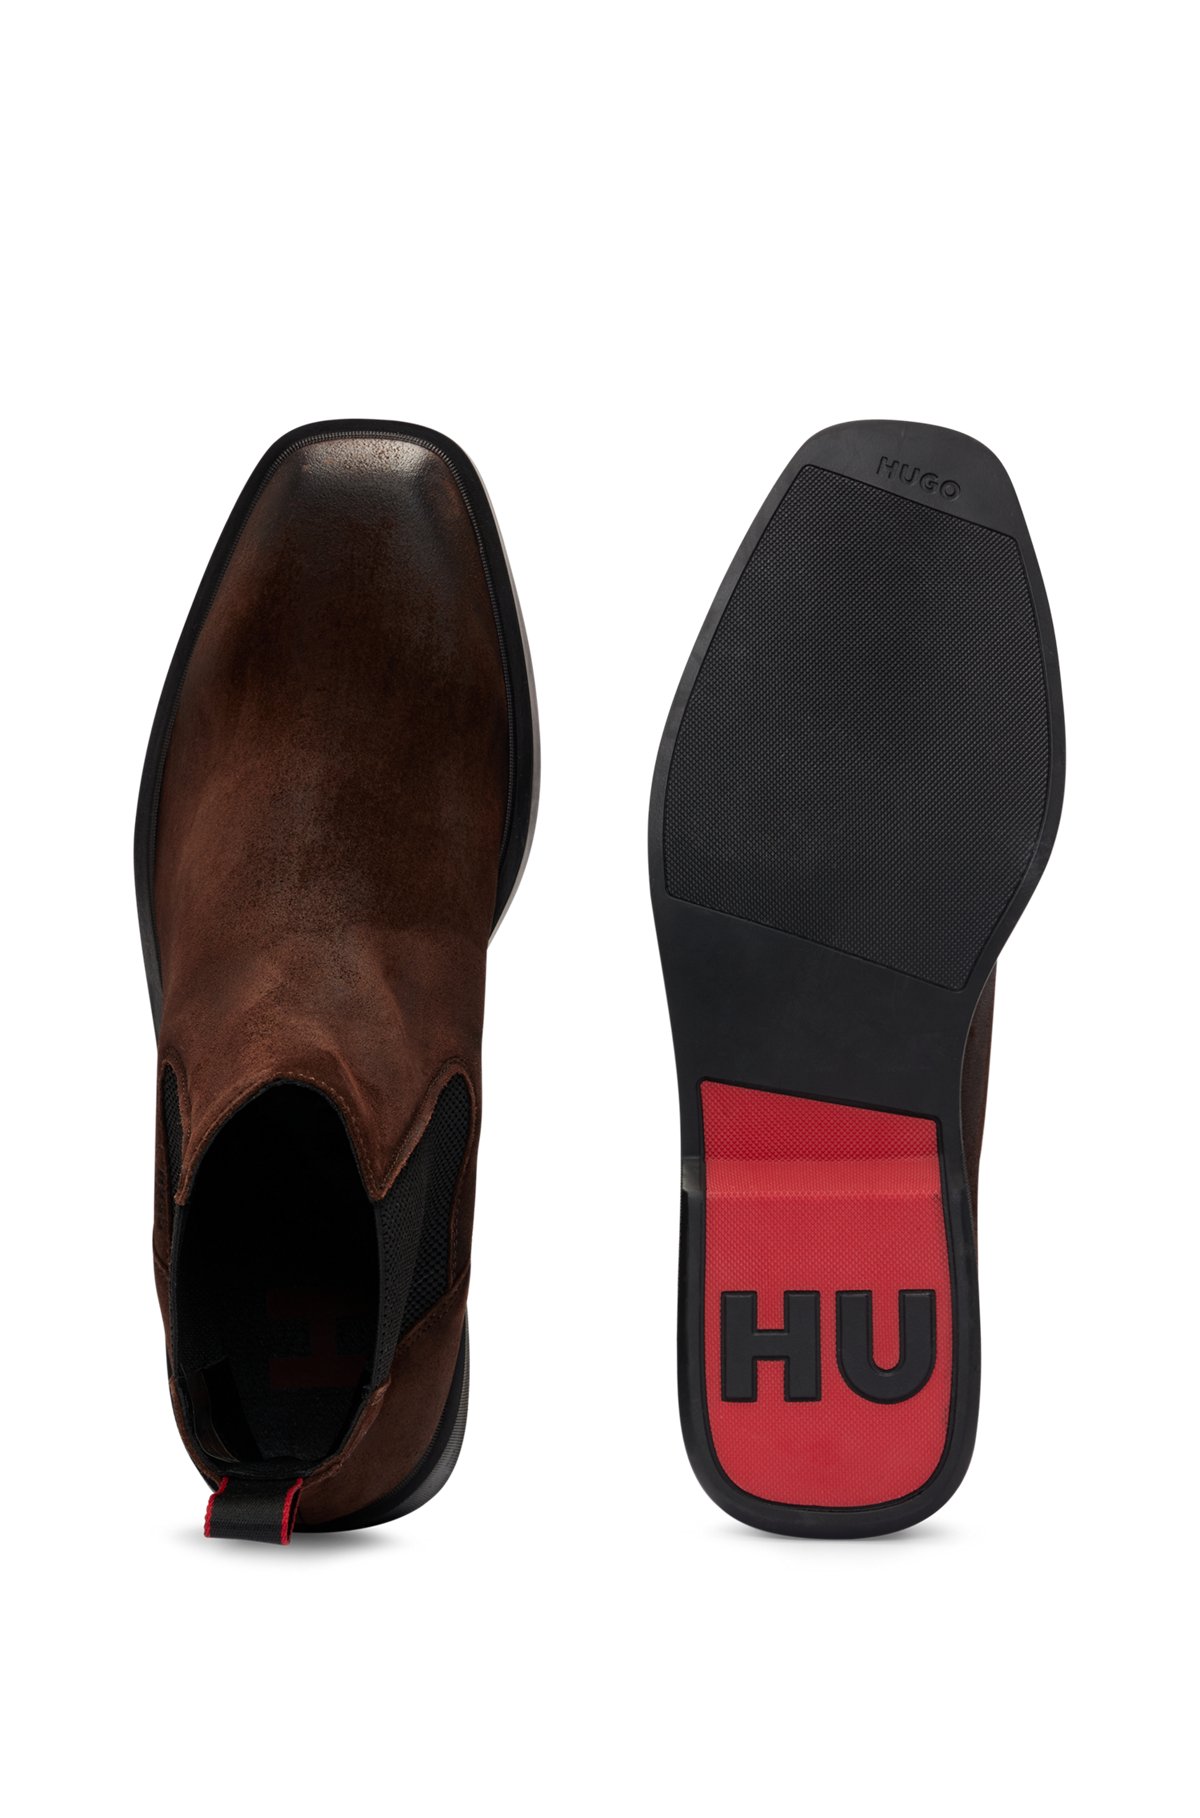 HUGO - Square-toe Chelsea boots in suede with signature details